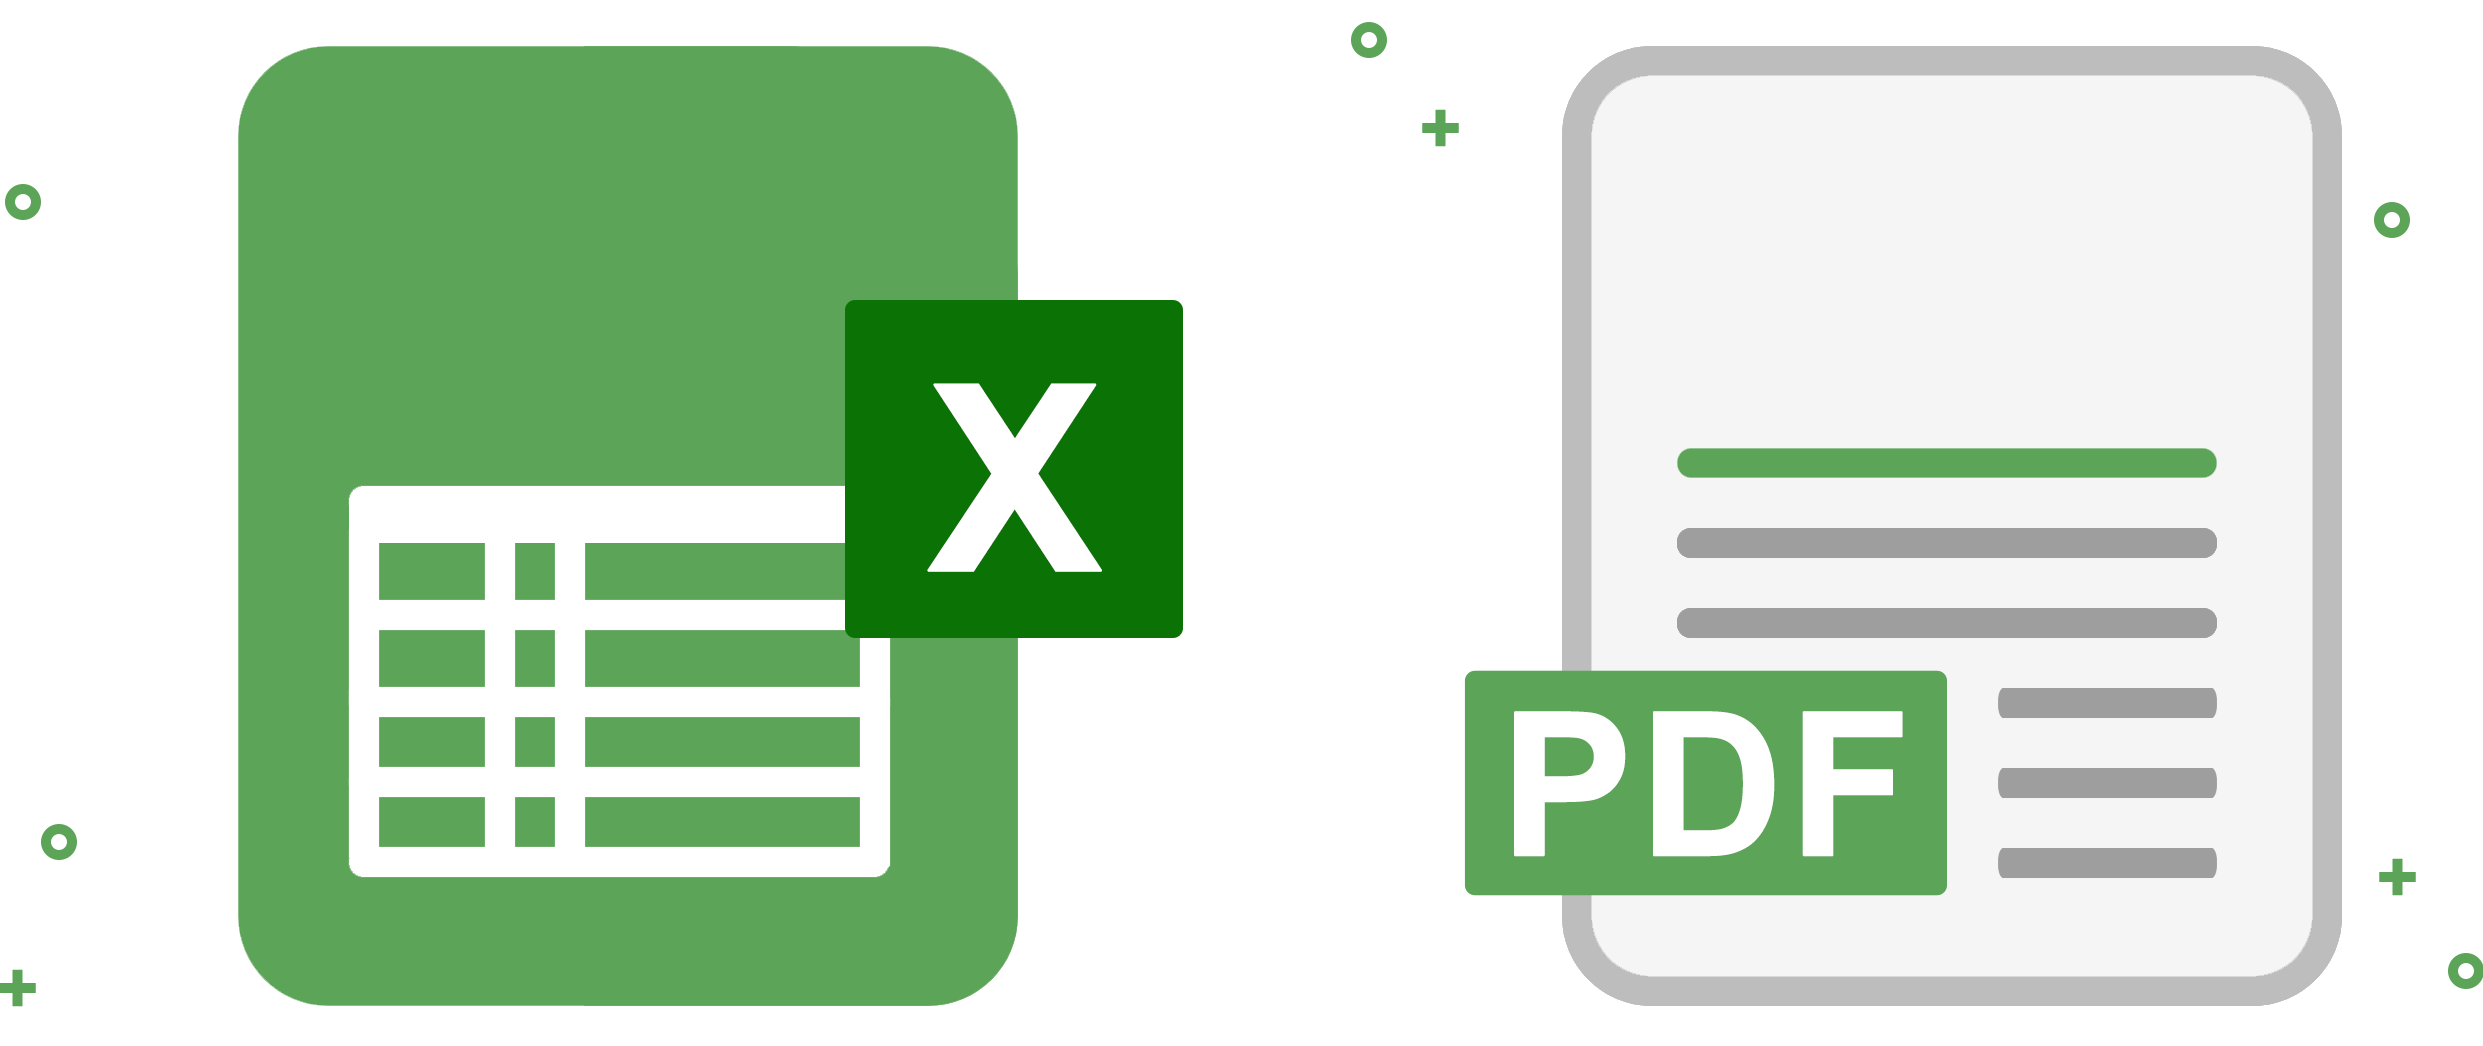 Excel to PDF - Convert Excel to PDF Online - 100% Free